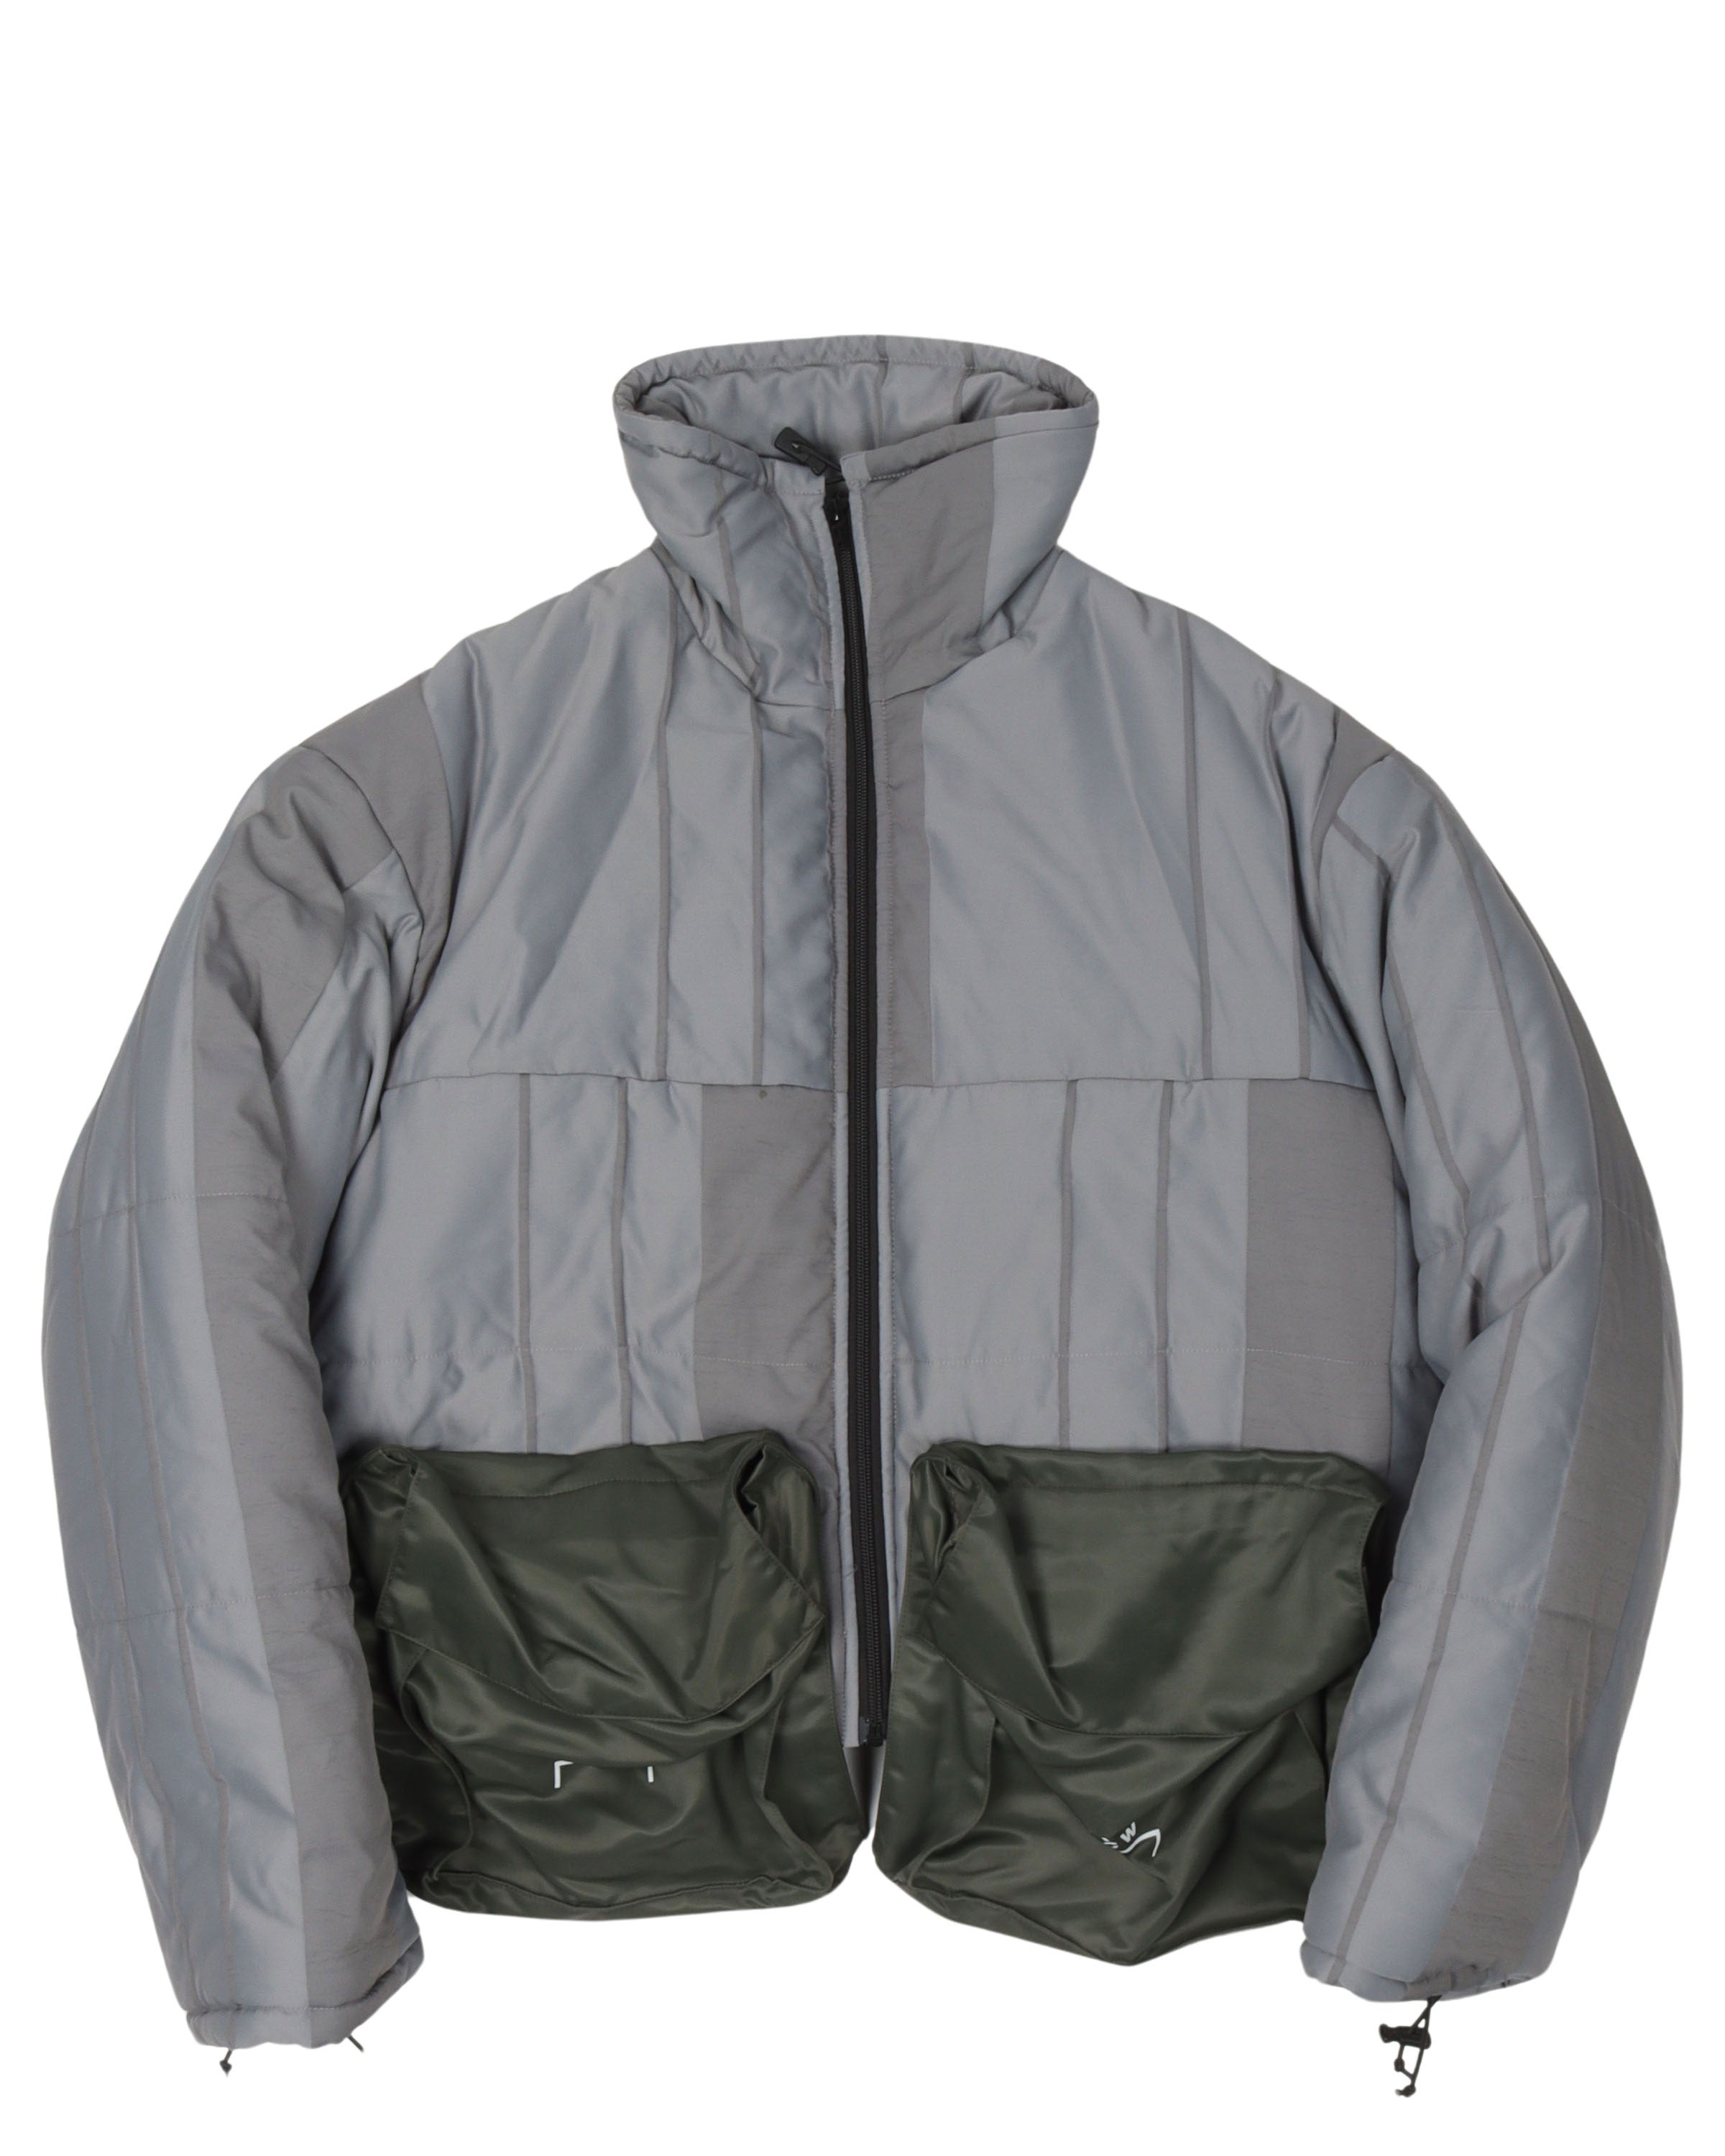 A-COLD-WALL* Cargo Puffer Jacket detachable pockets